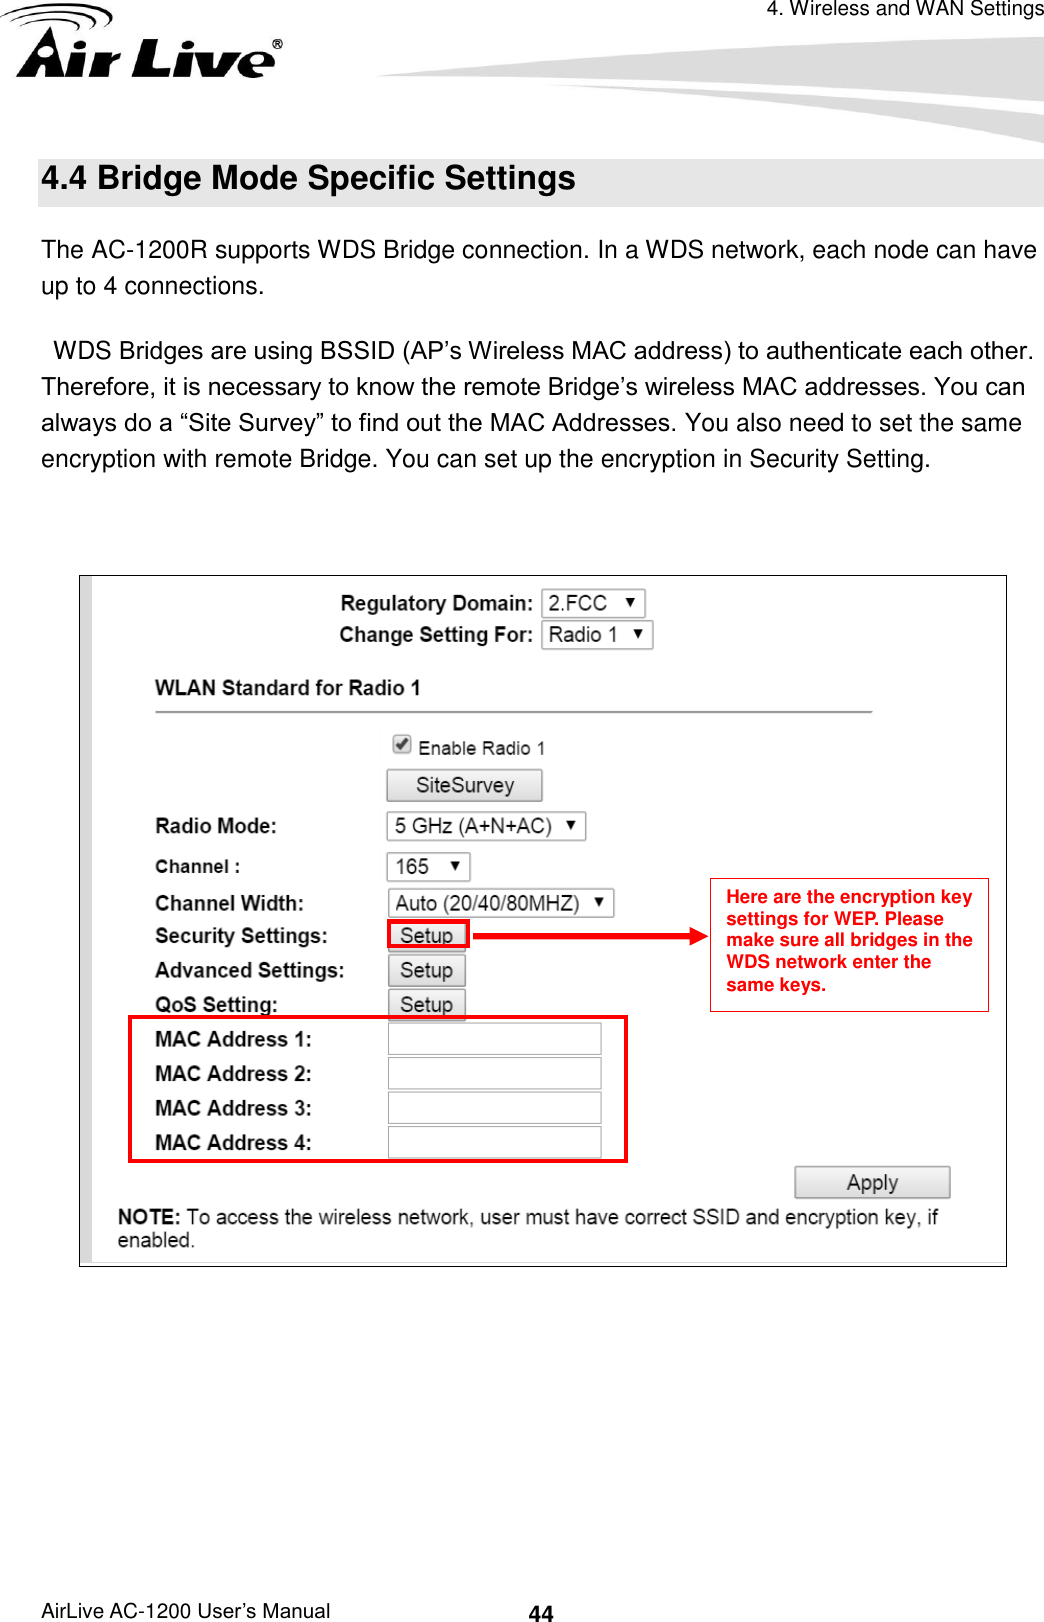 4. Wireless and WAN Settings AirLive AC-1200 User’s Manual 44 4.4 Bridge Mode Specific Settings The AC-1200R supports WDS Bridge connection. In a WDS network, each node can have up to 4 connections.   WDS Bridges are using BSSID (AP’s Wireless MAC address) to authenticate each other. Therefore, it is necessary to know the remote Bridge’s wireless MAC addresses. You can always do a “Site Survey” to find out the MAC Addresses. You also need to set the same encryption with remote Bridge. You can set up the encryption in Security Setting.         Here are the encryption key settings for WEP. Please make sure all bridges in the WDS network enter the same keys. 